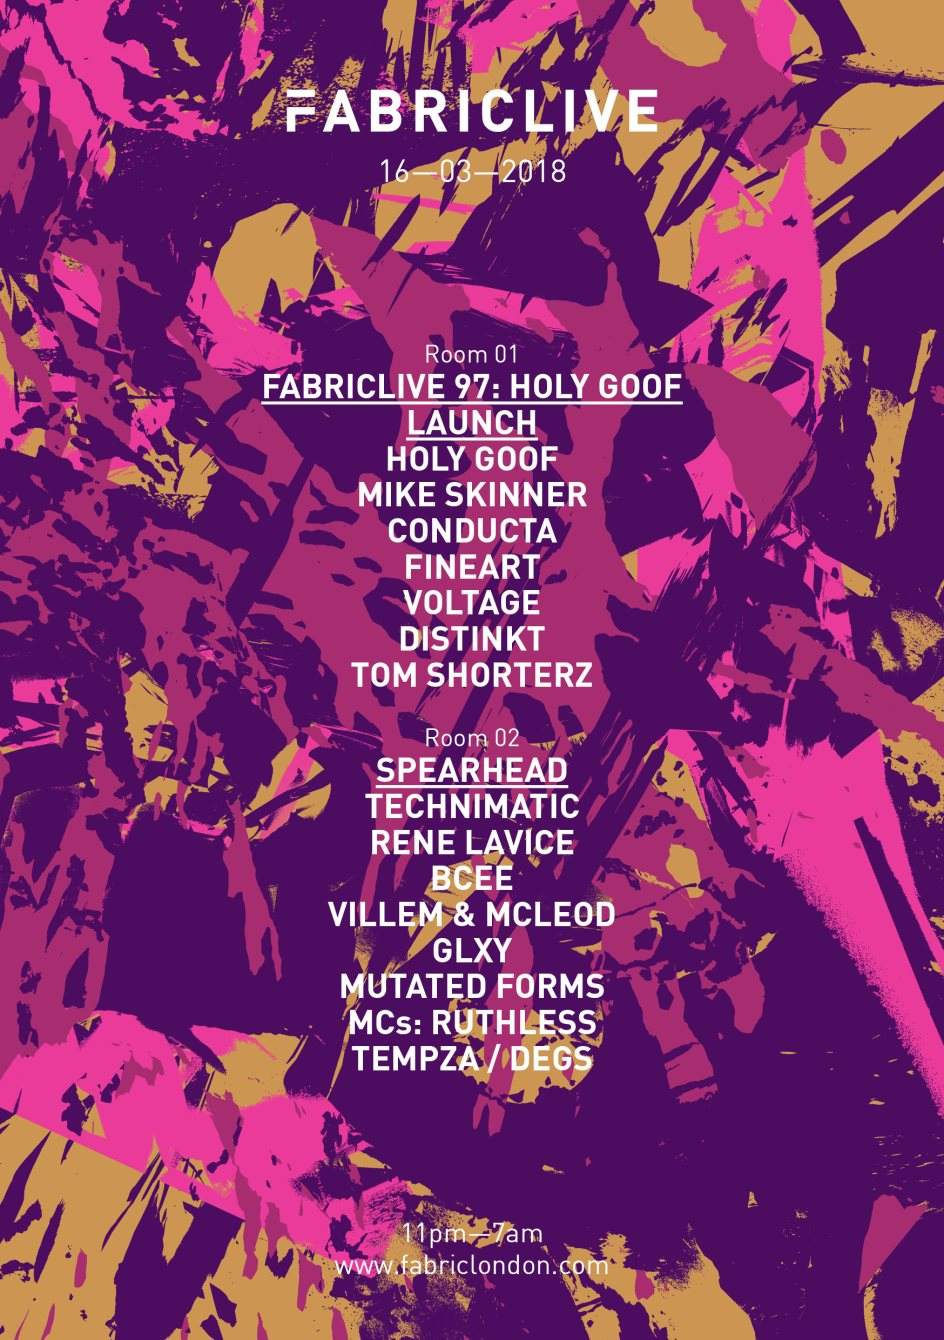 FABRICLIVE 97: Holy Goof Launch x Spearhead with Technimatic - Página trasera